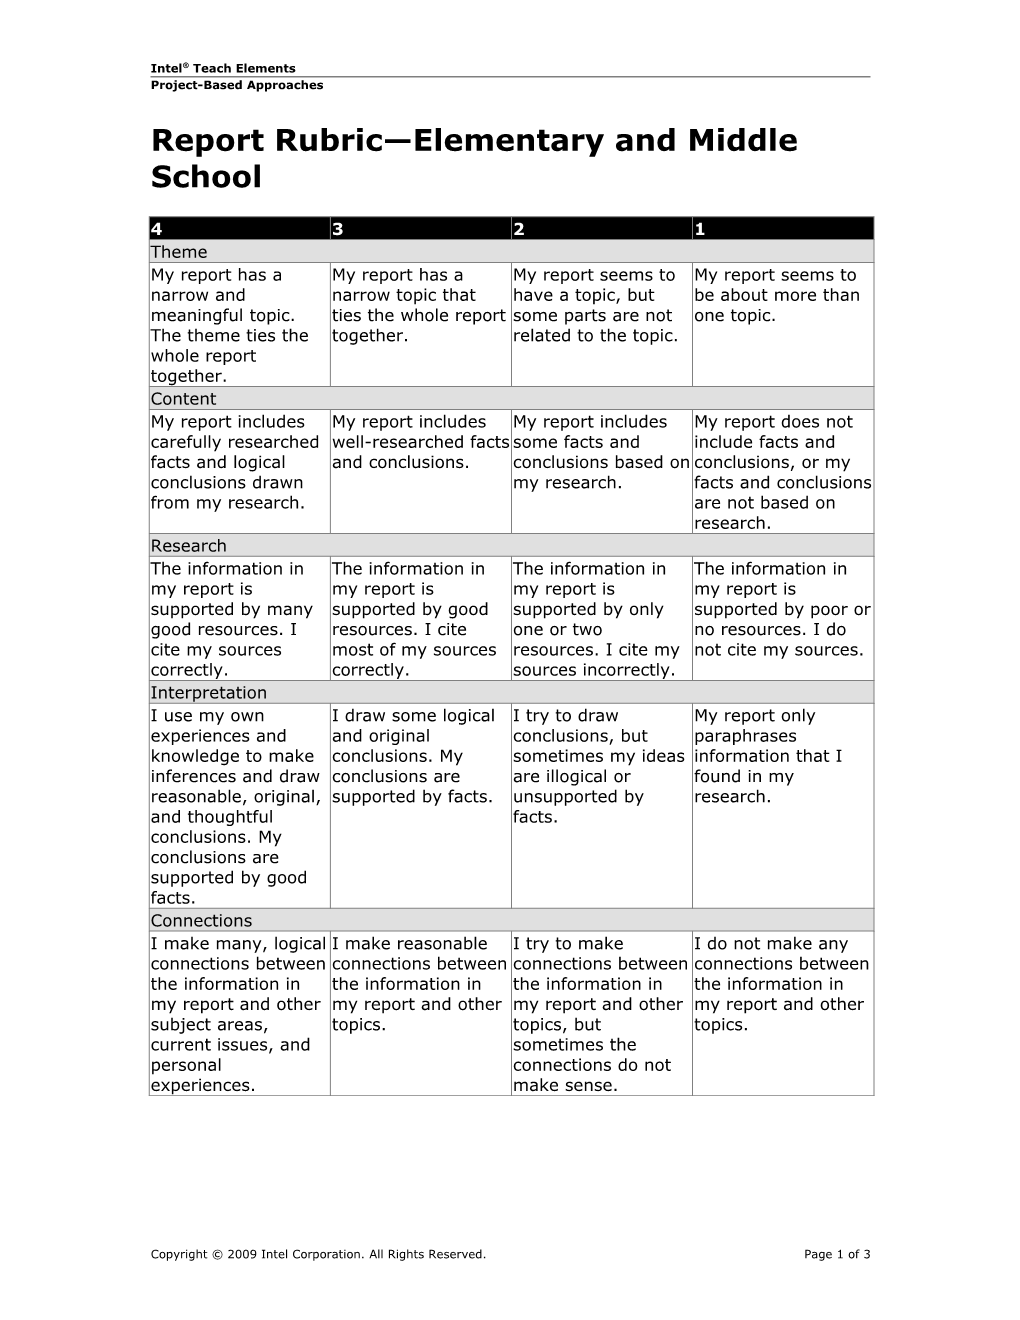 Report Rubric Elementary and Middle School